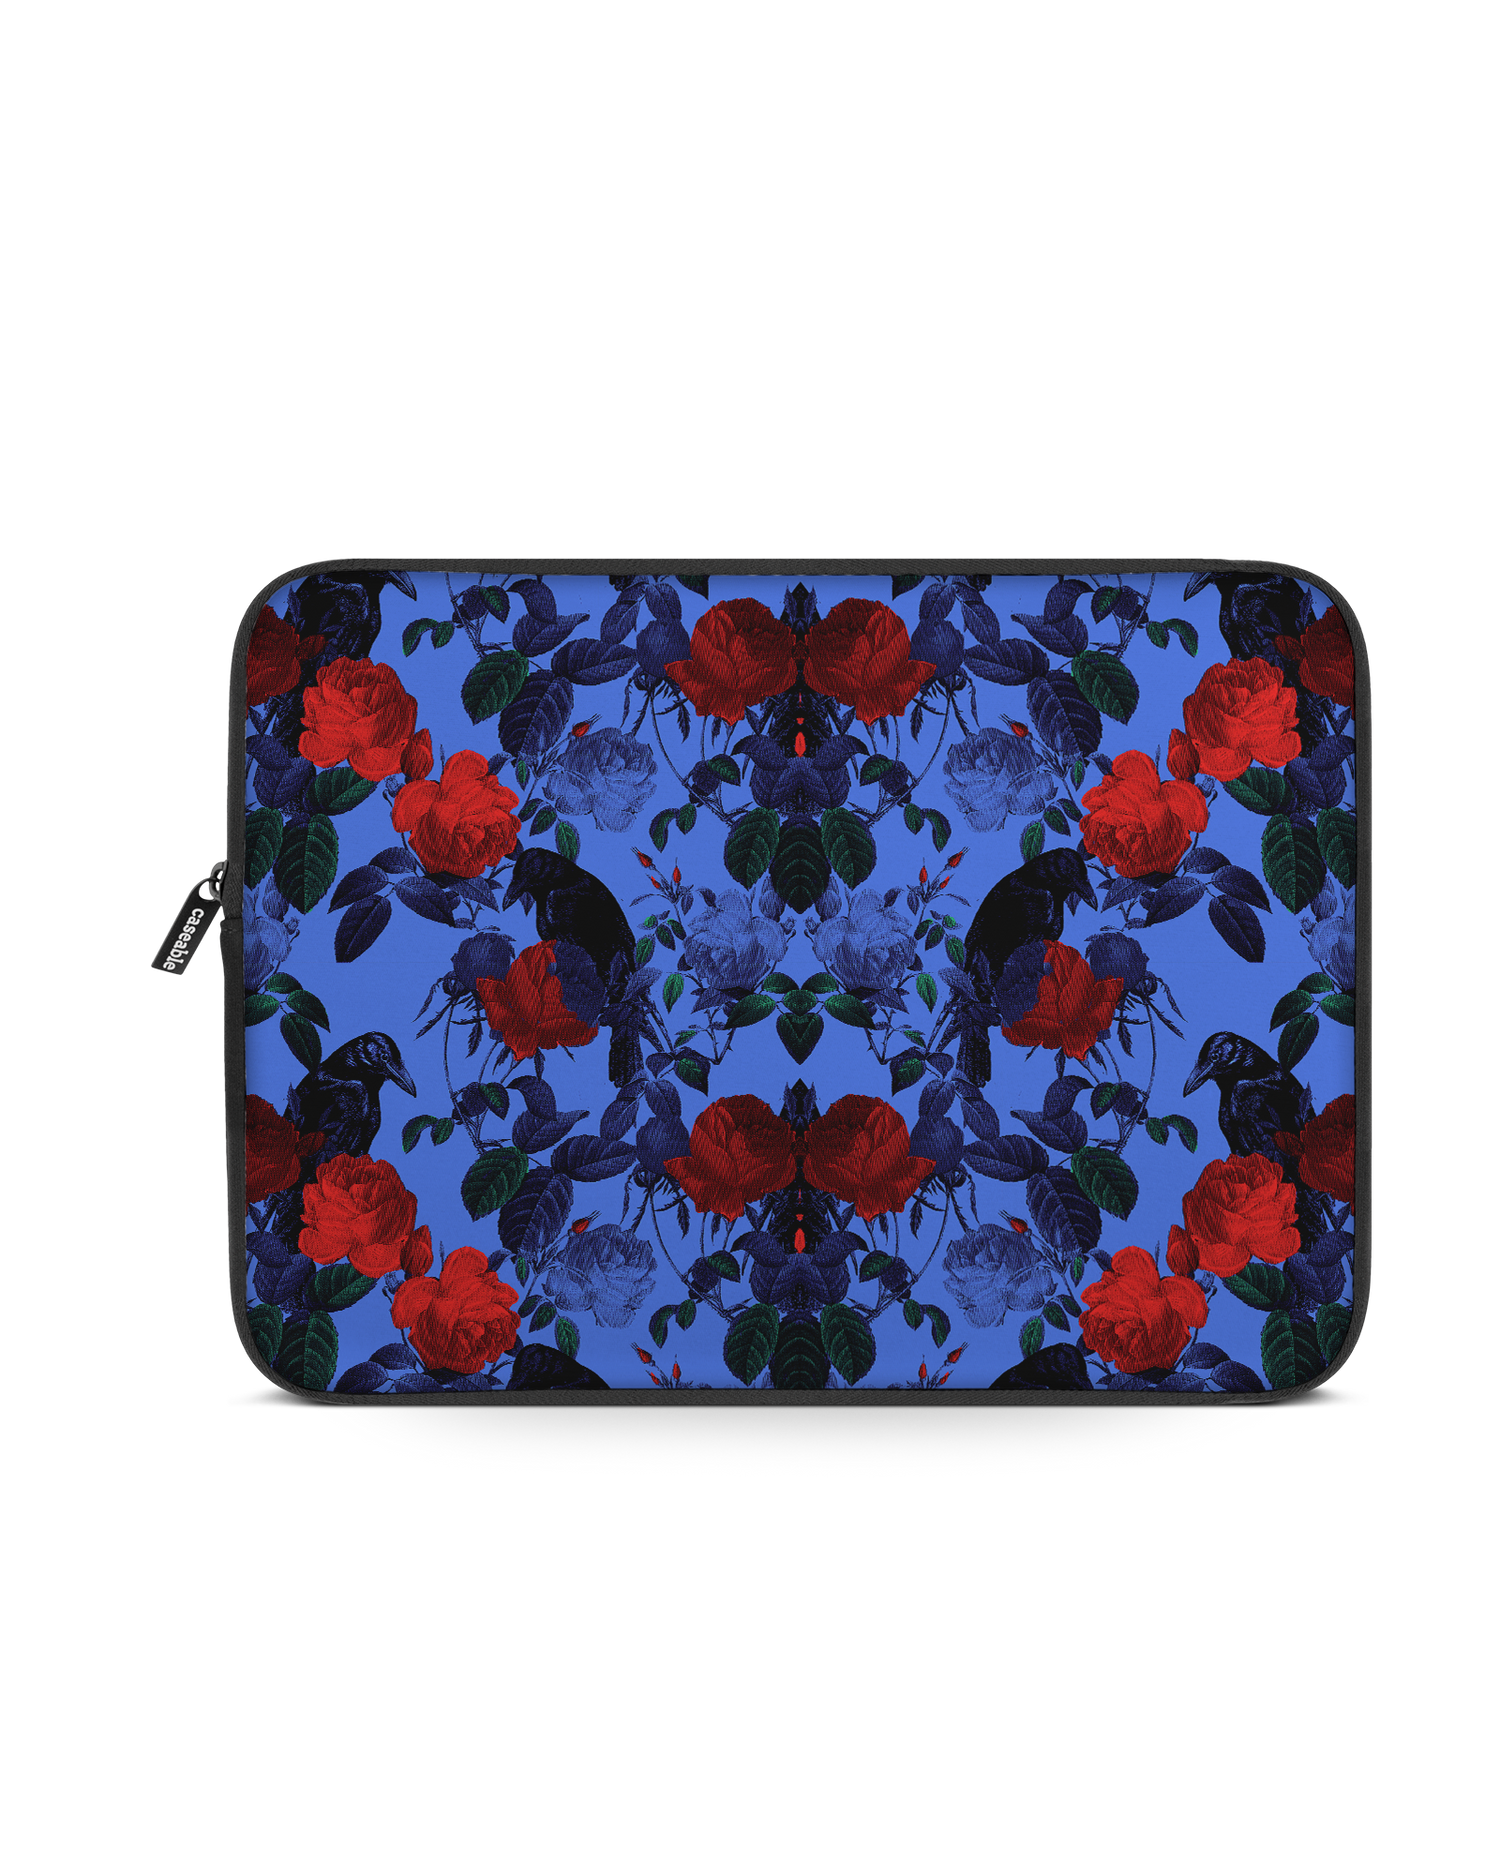 Roses And Ravens Laptop Case 13 inch: Front View